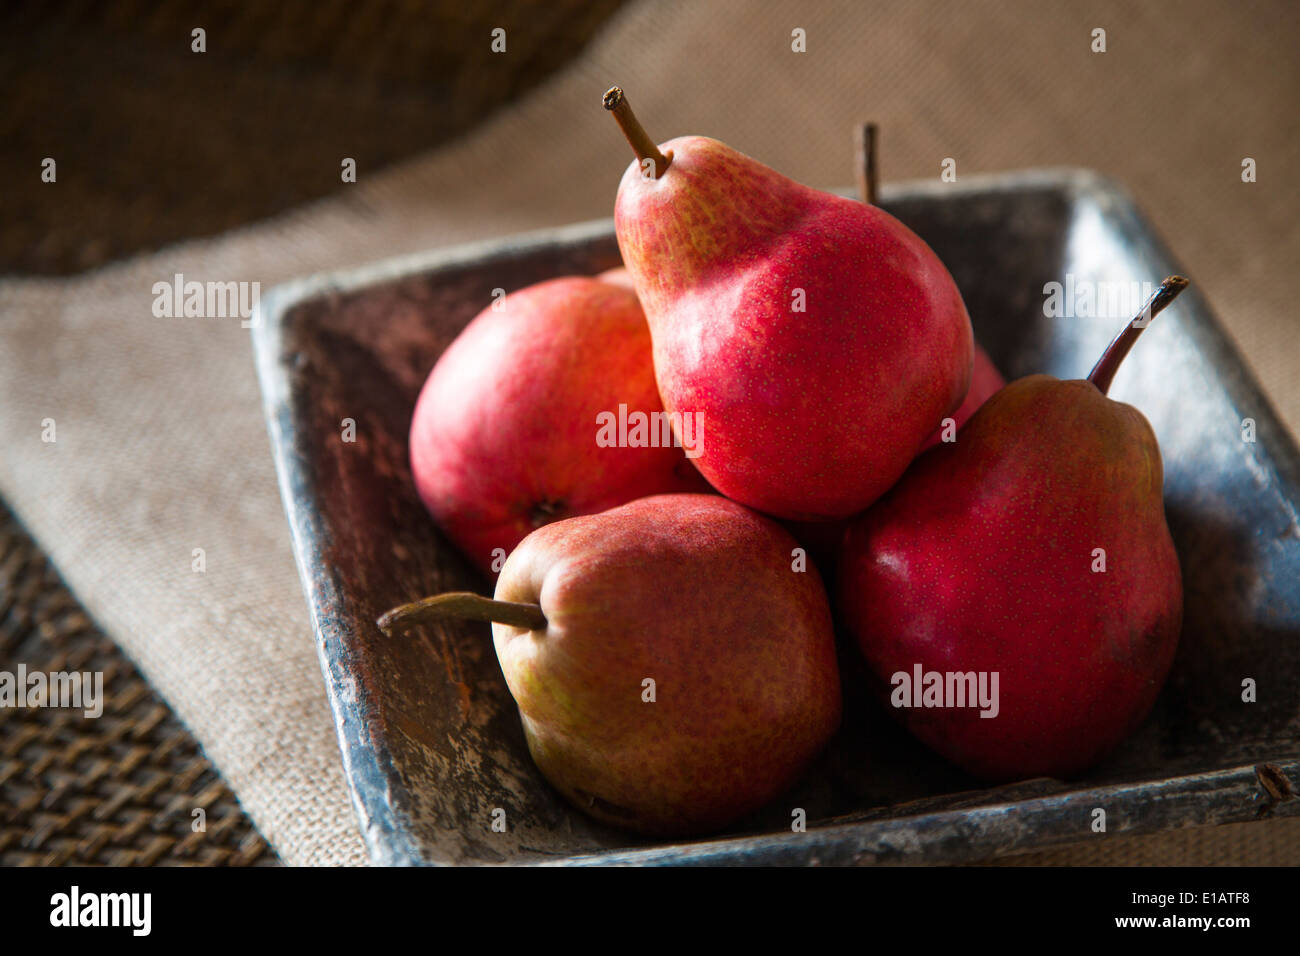 group of red pears in rustic ceramic dish, on sack cloth and woven tray. Stock Photo